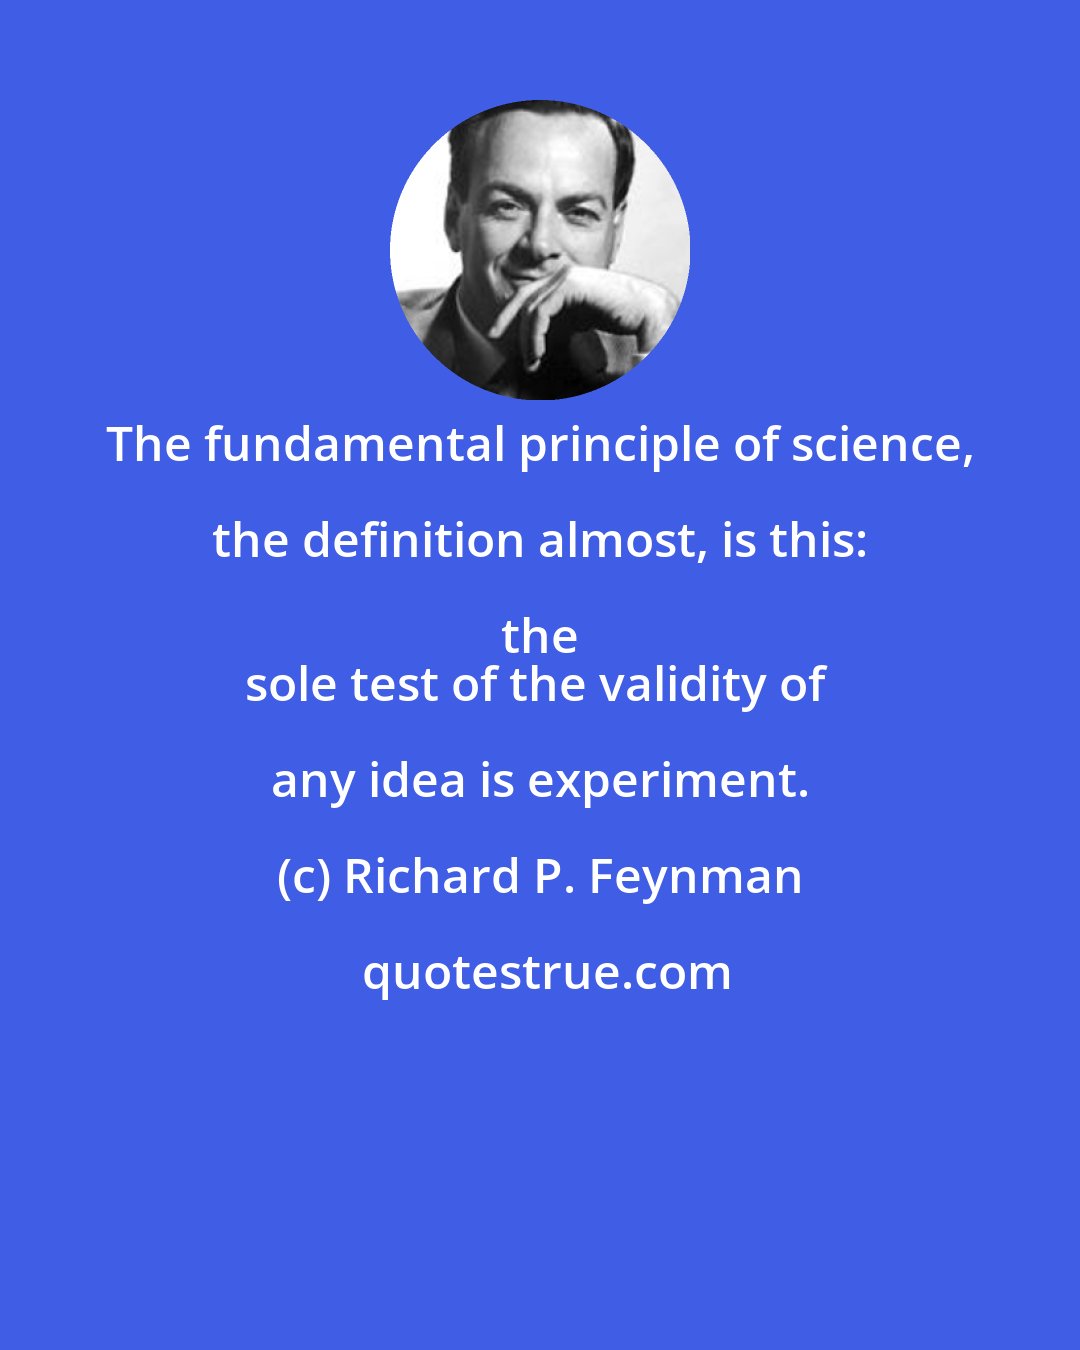 Richard P. Feynman: The fundamental principle of science, the definition almost, is this: the 
sole test of the validity of any idea is experiment.